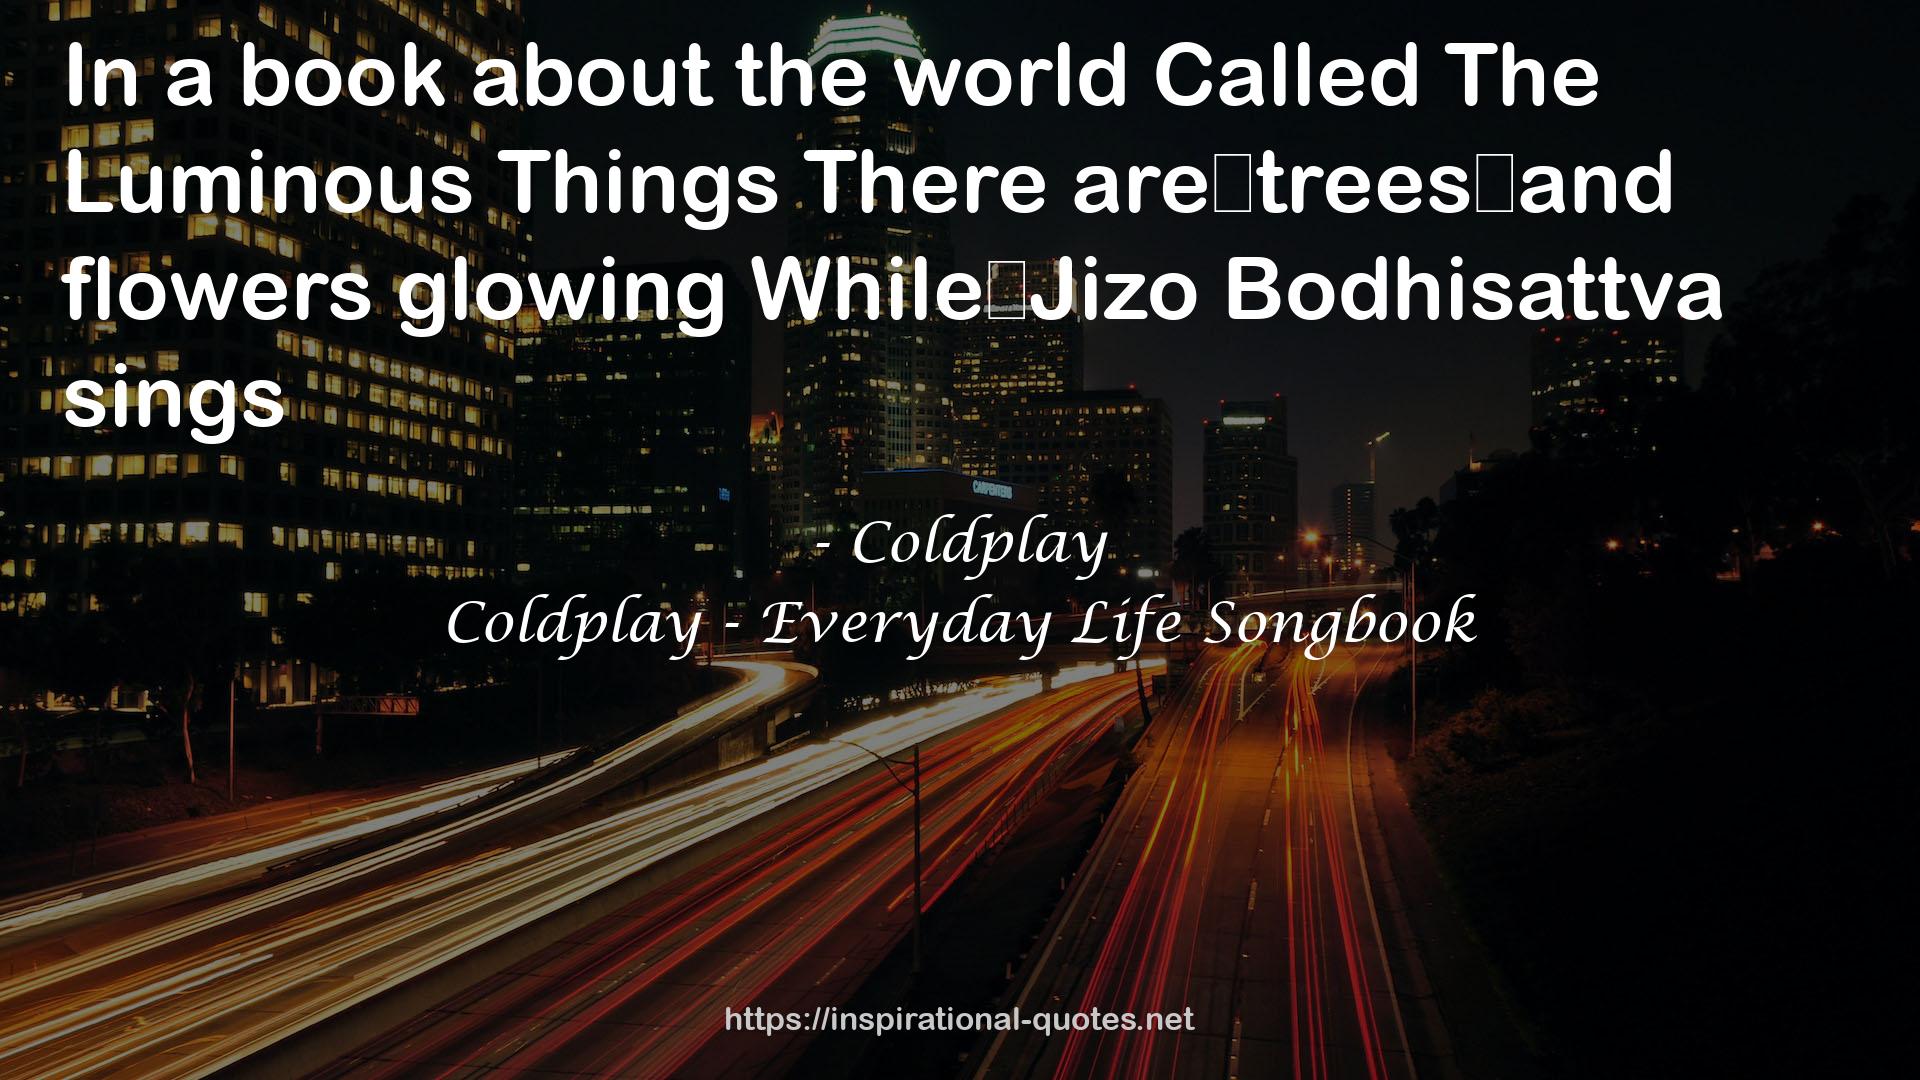 Coldplay - Everyday Life Songbook QUOTES